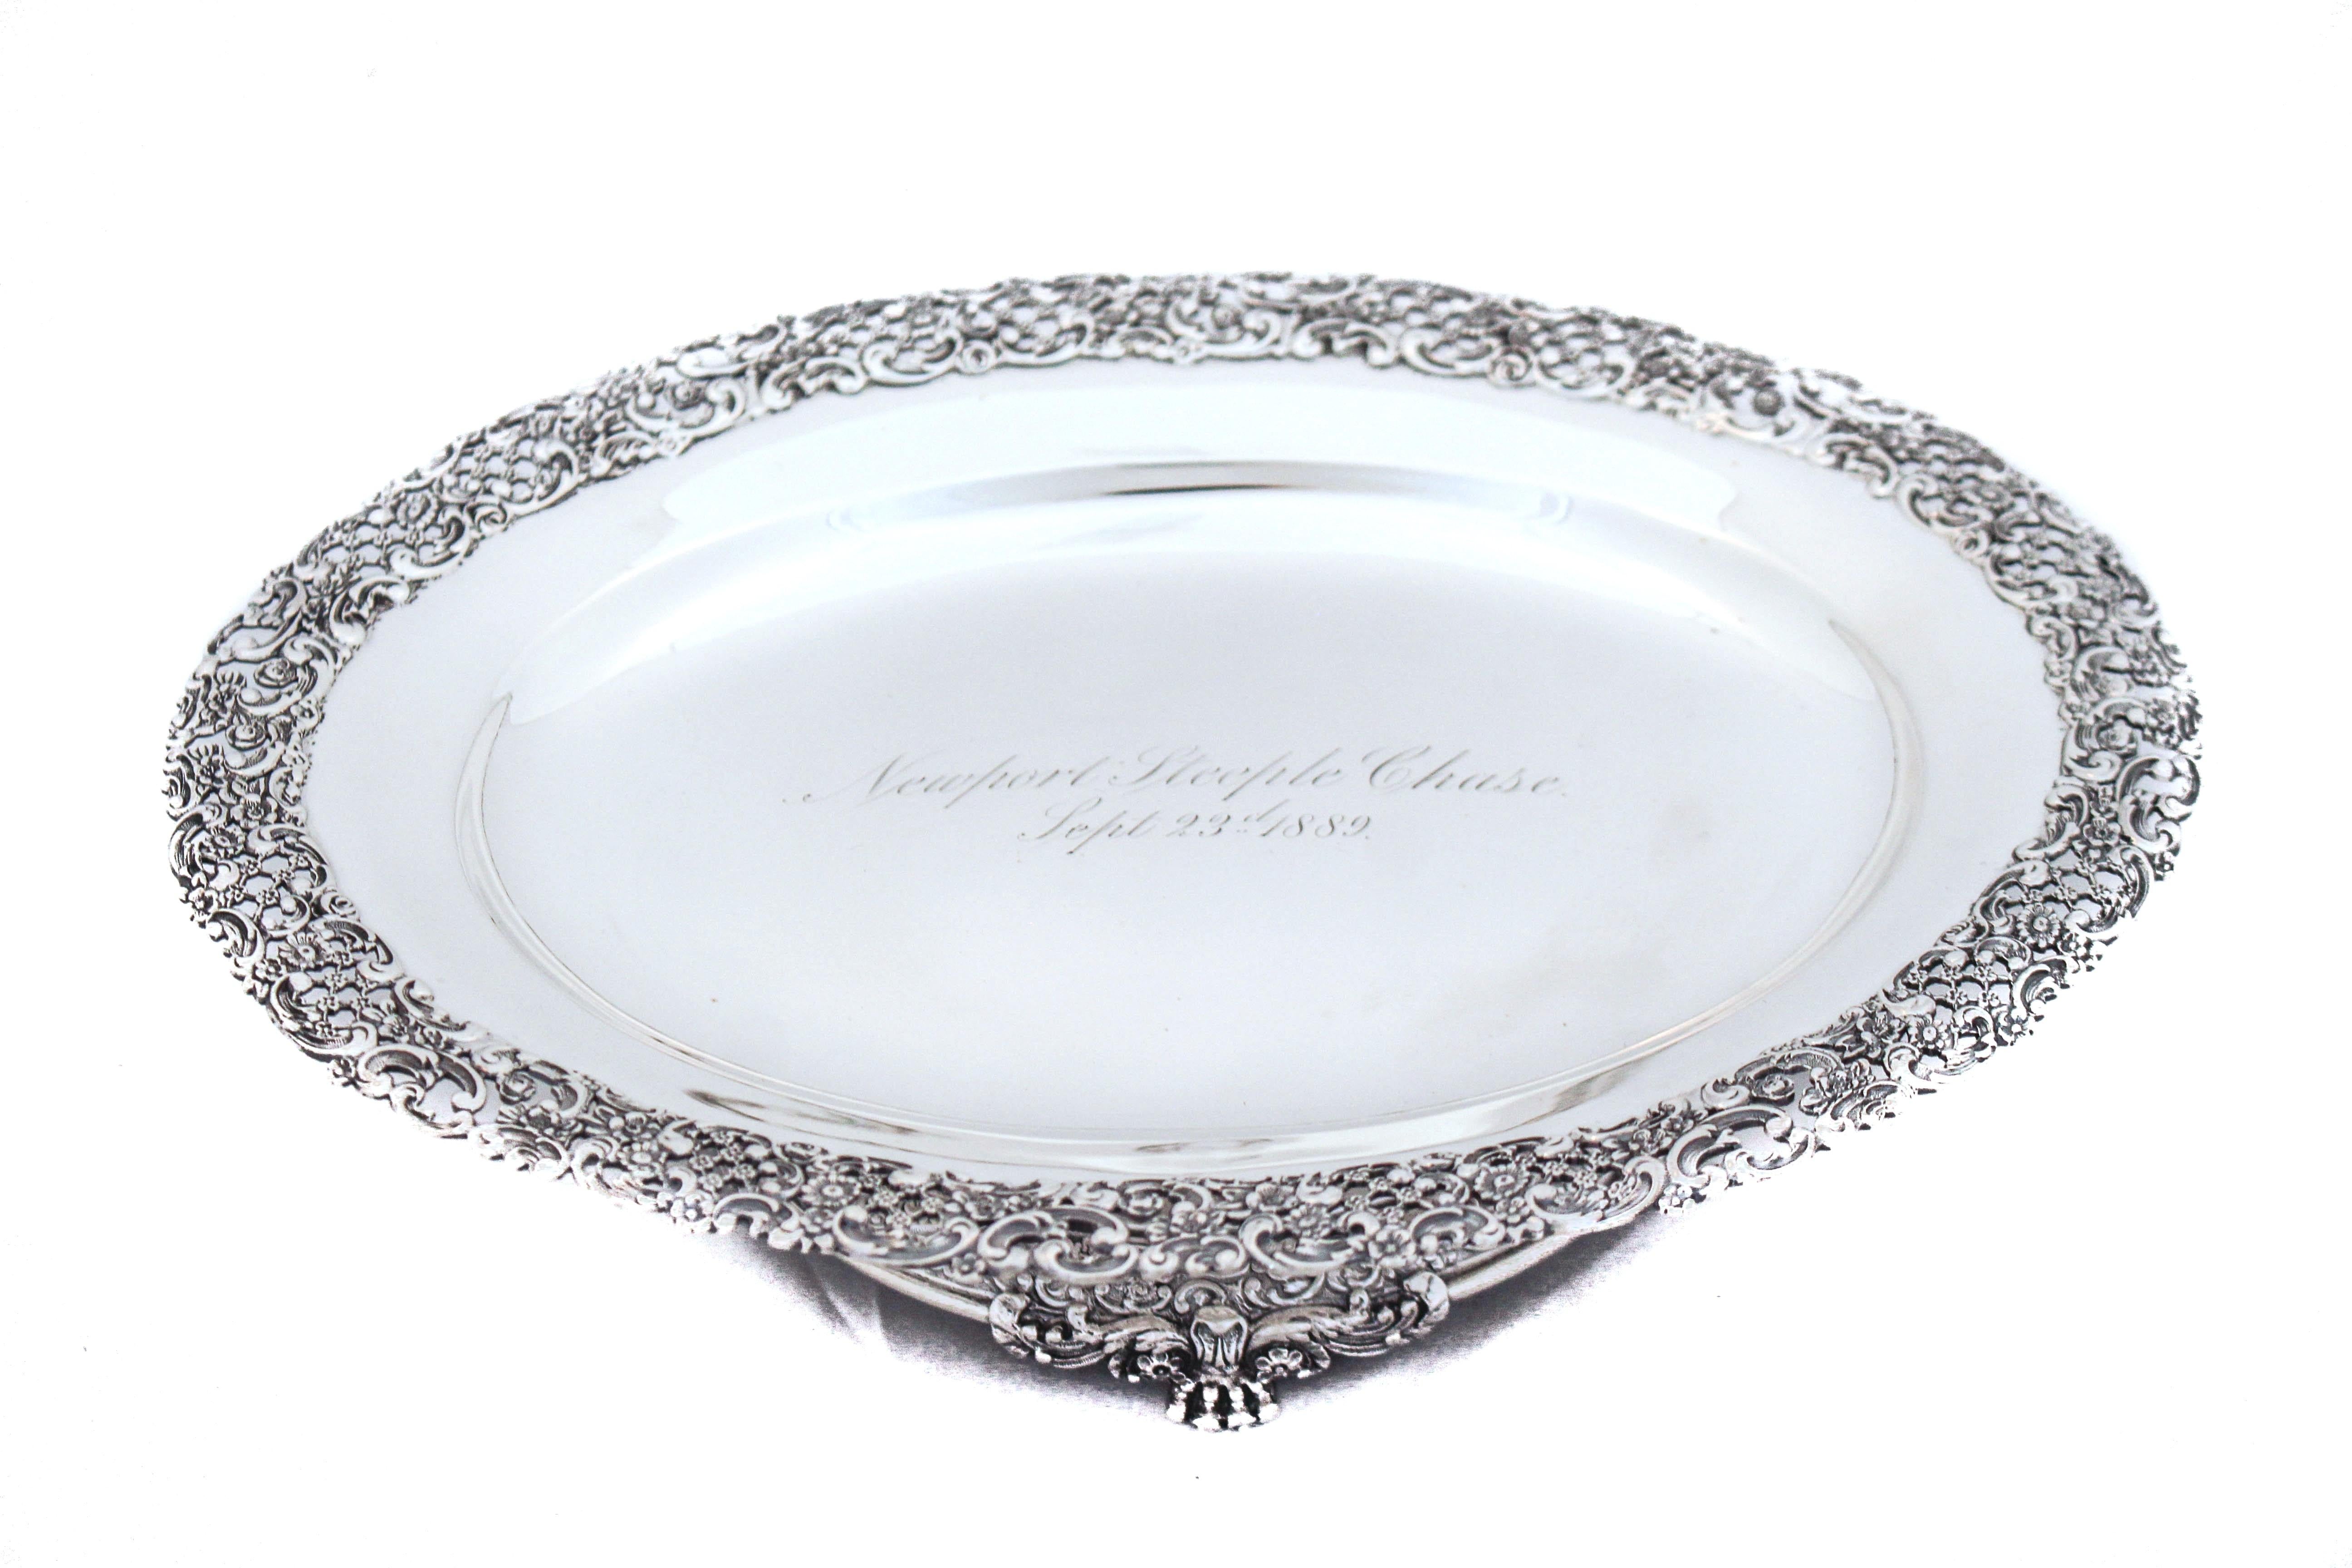 An extraordinary pair of sterling silver tazzas by the world renowned Tiffany and Company.  They are oval in shape and stand on pedestals.  They have a floral reticulated design going around the edge and the same design around the base.  Each one is